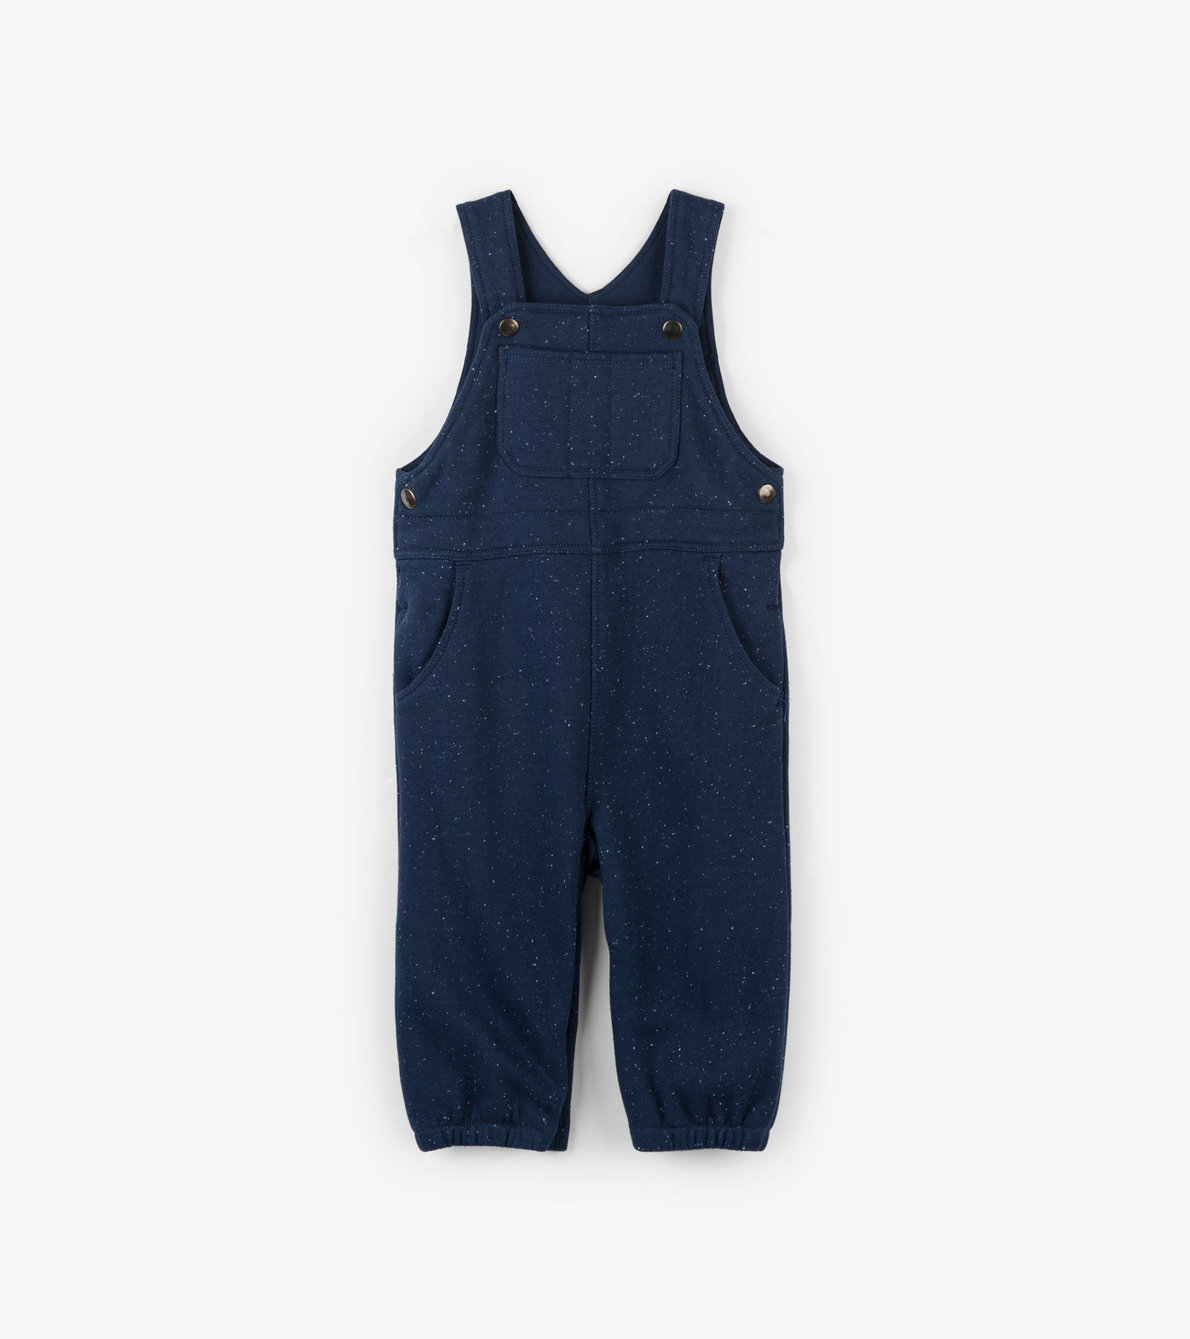 View larger image of Navy Knit Baby Overall